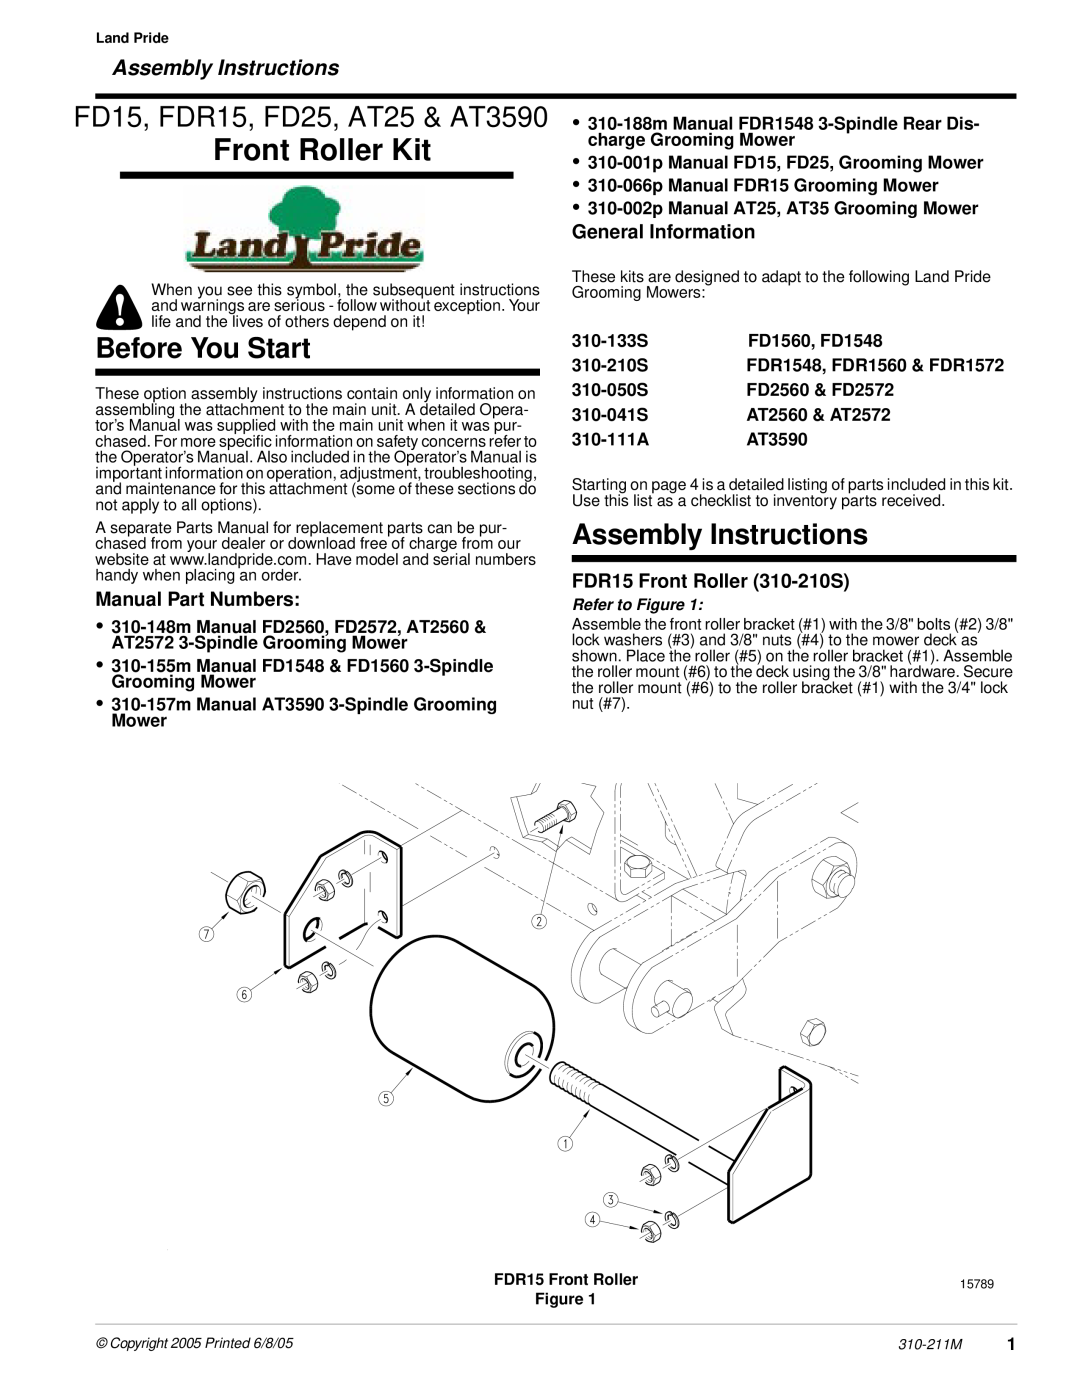 Land Pride FD25 manual Assembly Instructions, General Information, Manual Part Numbers, FDR15 Front Roller 310-210S 